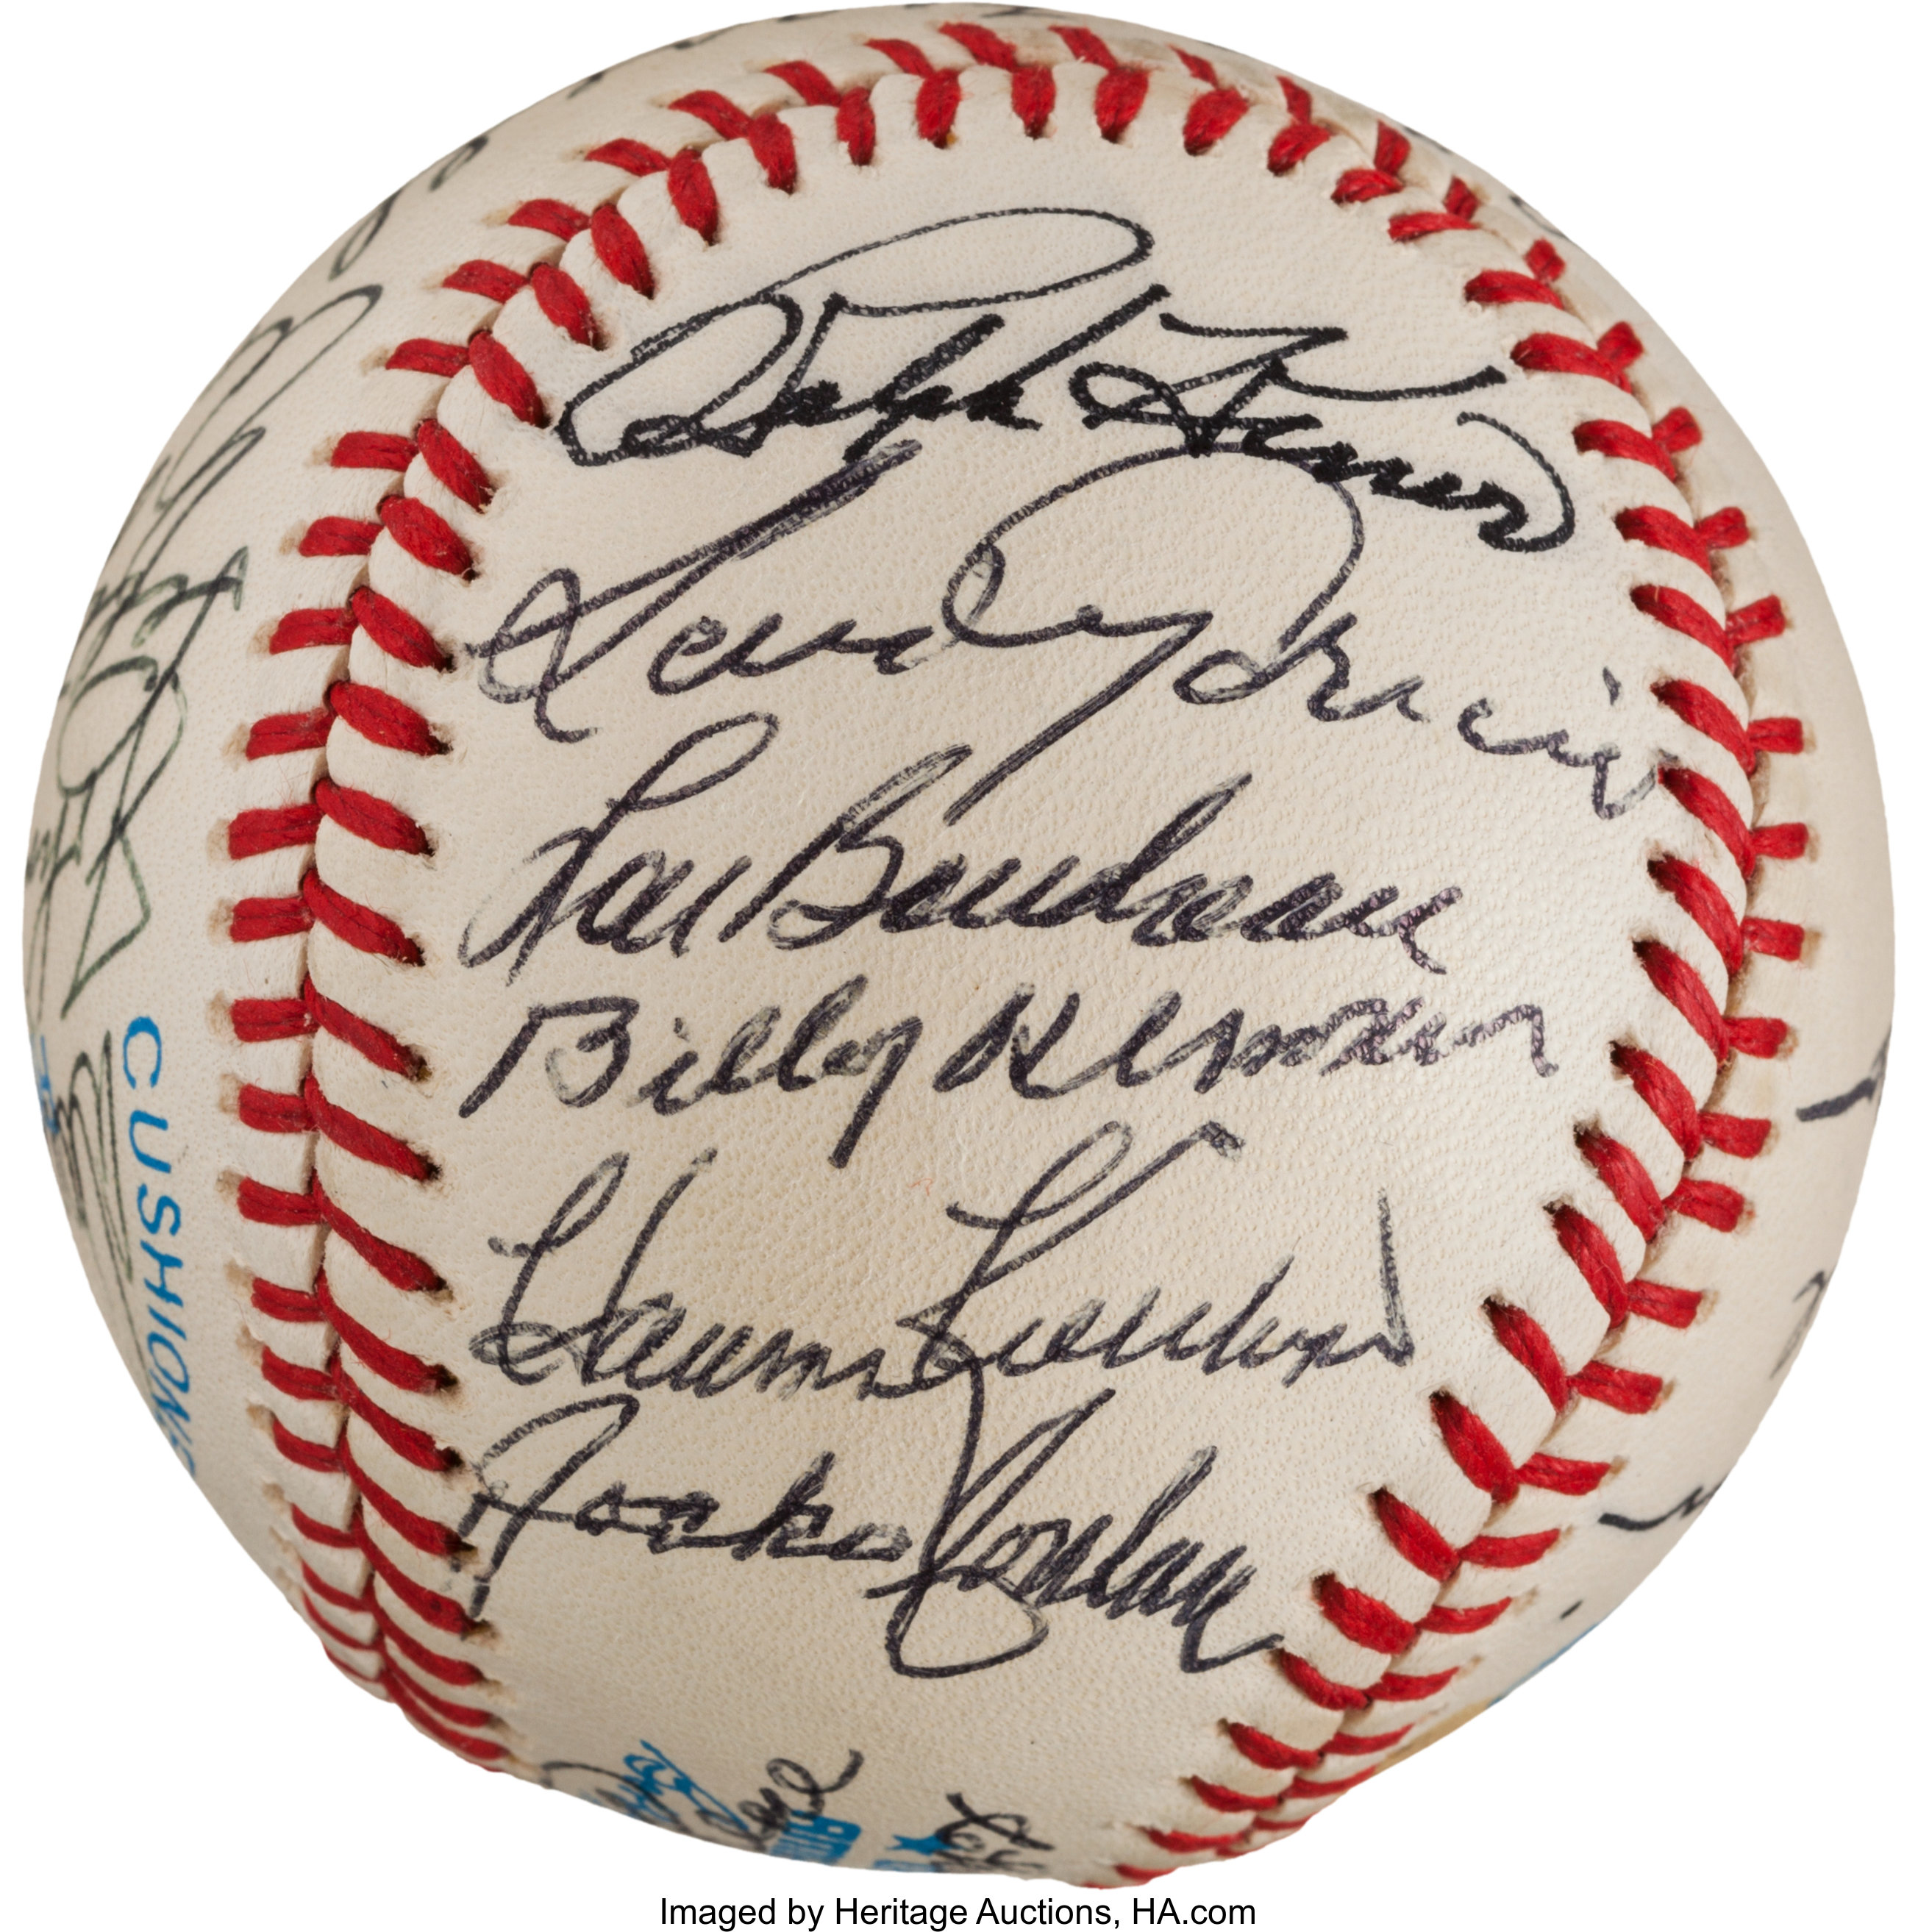 Sold at Auction: Stan Musial Autographed Baseball